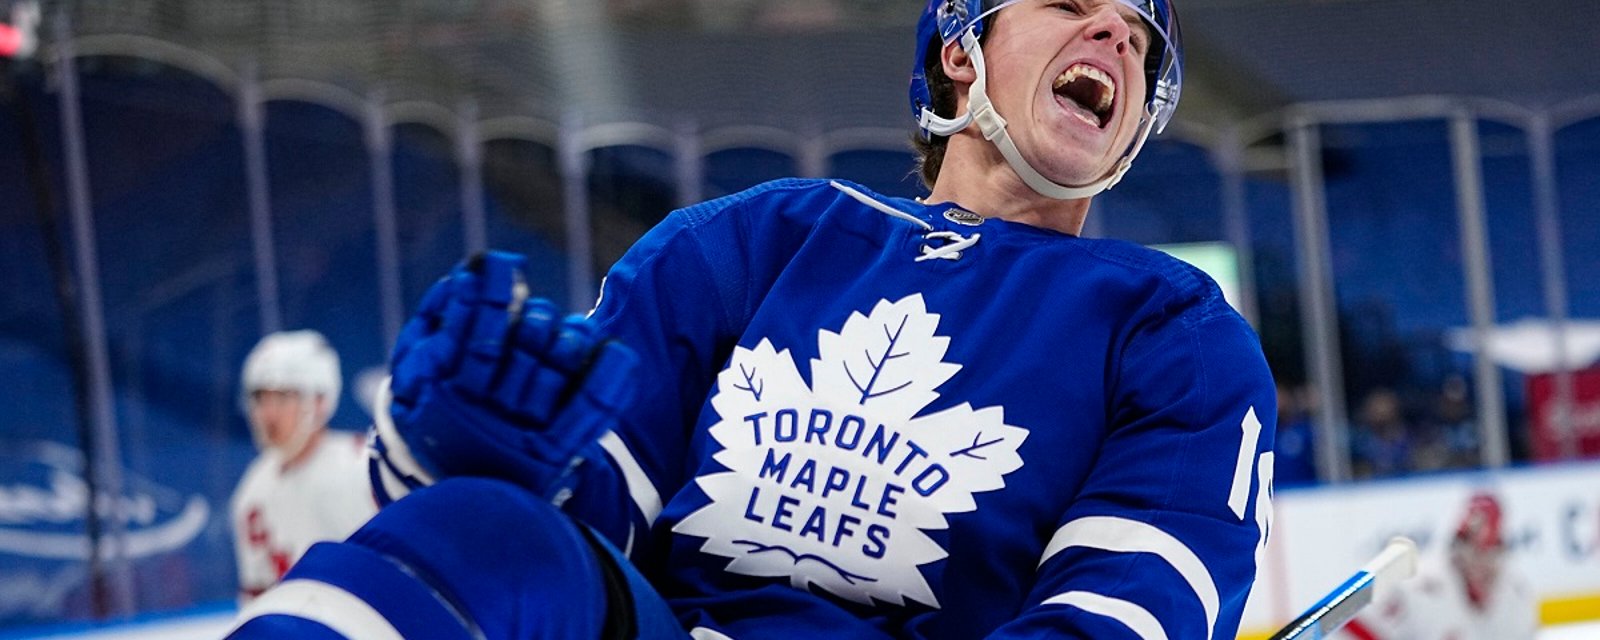 Mitch Marner sets a new Toronto Maple Leafs record.